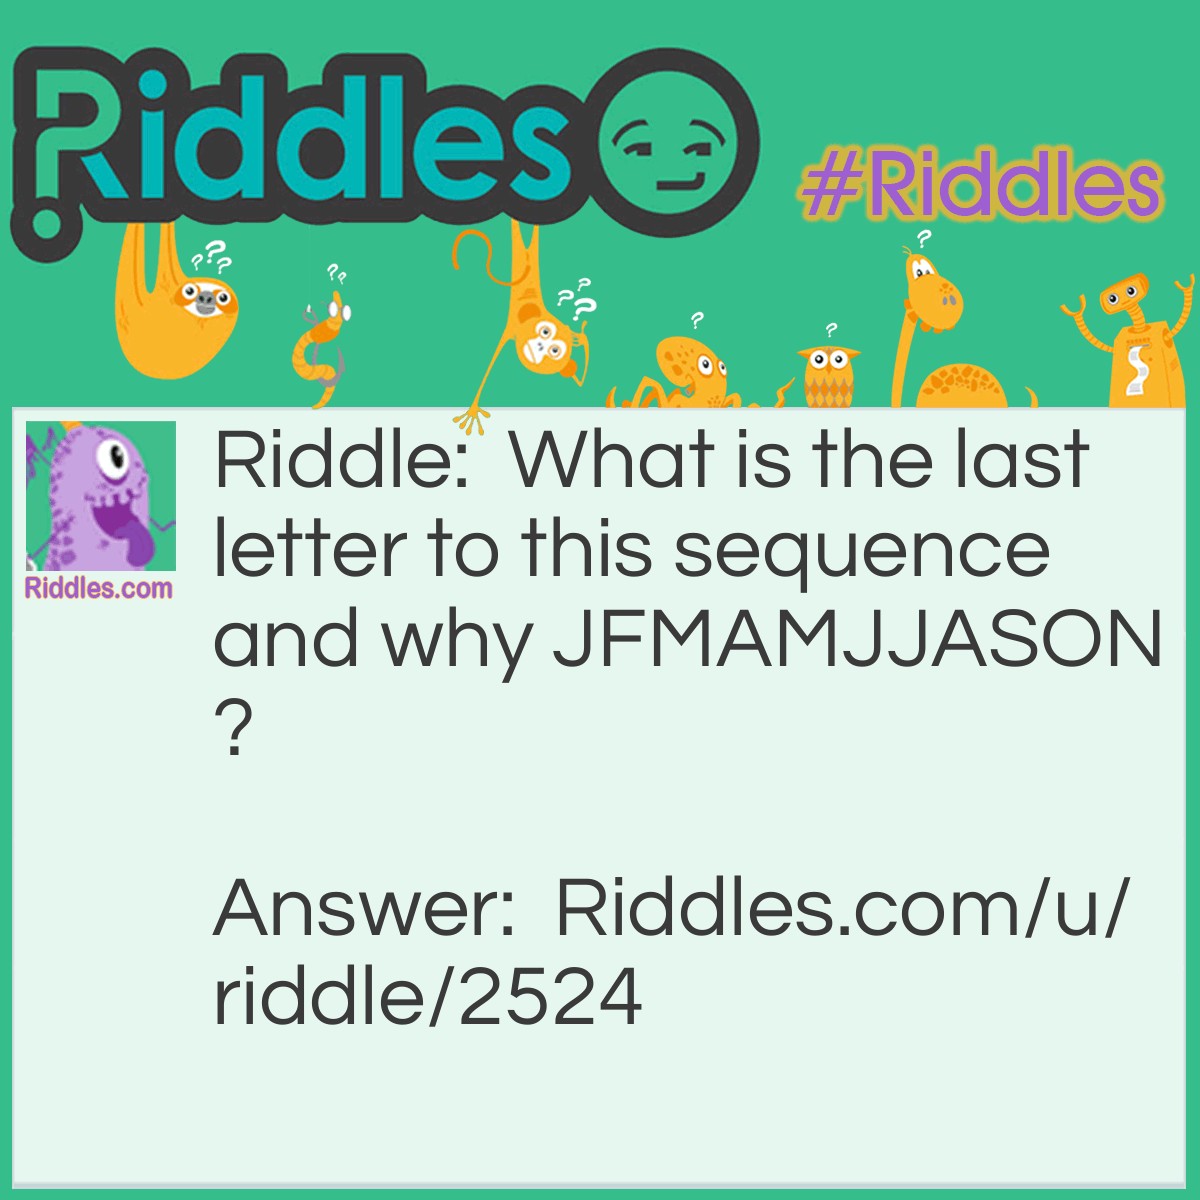 Riddle: What is the last letter to this sequence and why JFMAMJJASON? Answer: D, the sequence is going by months.